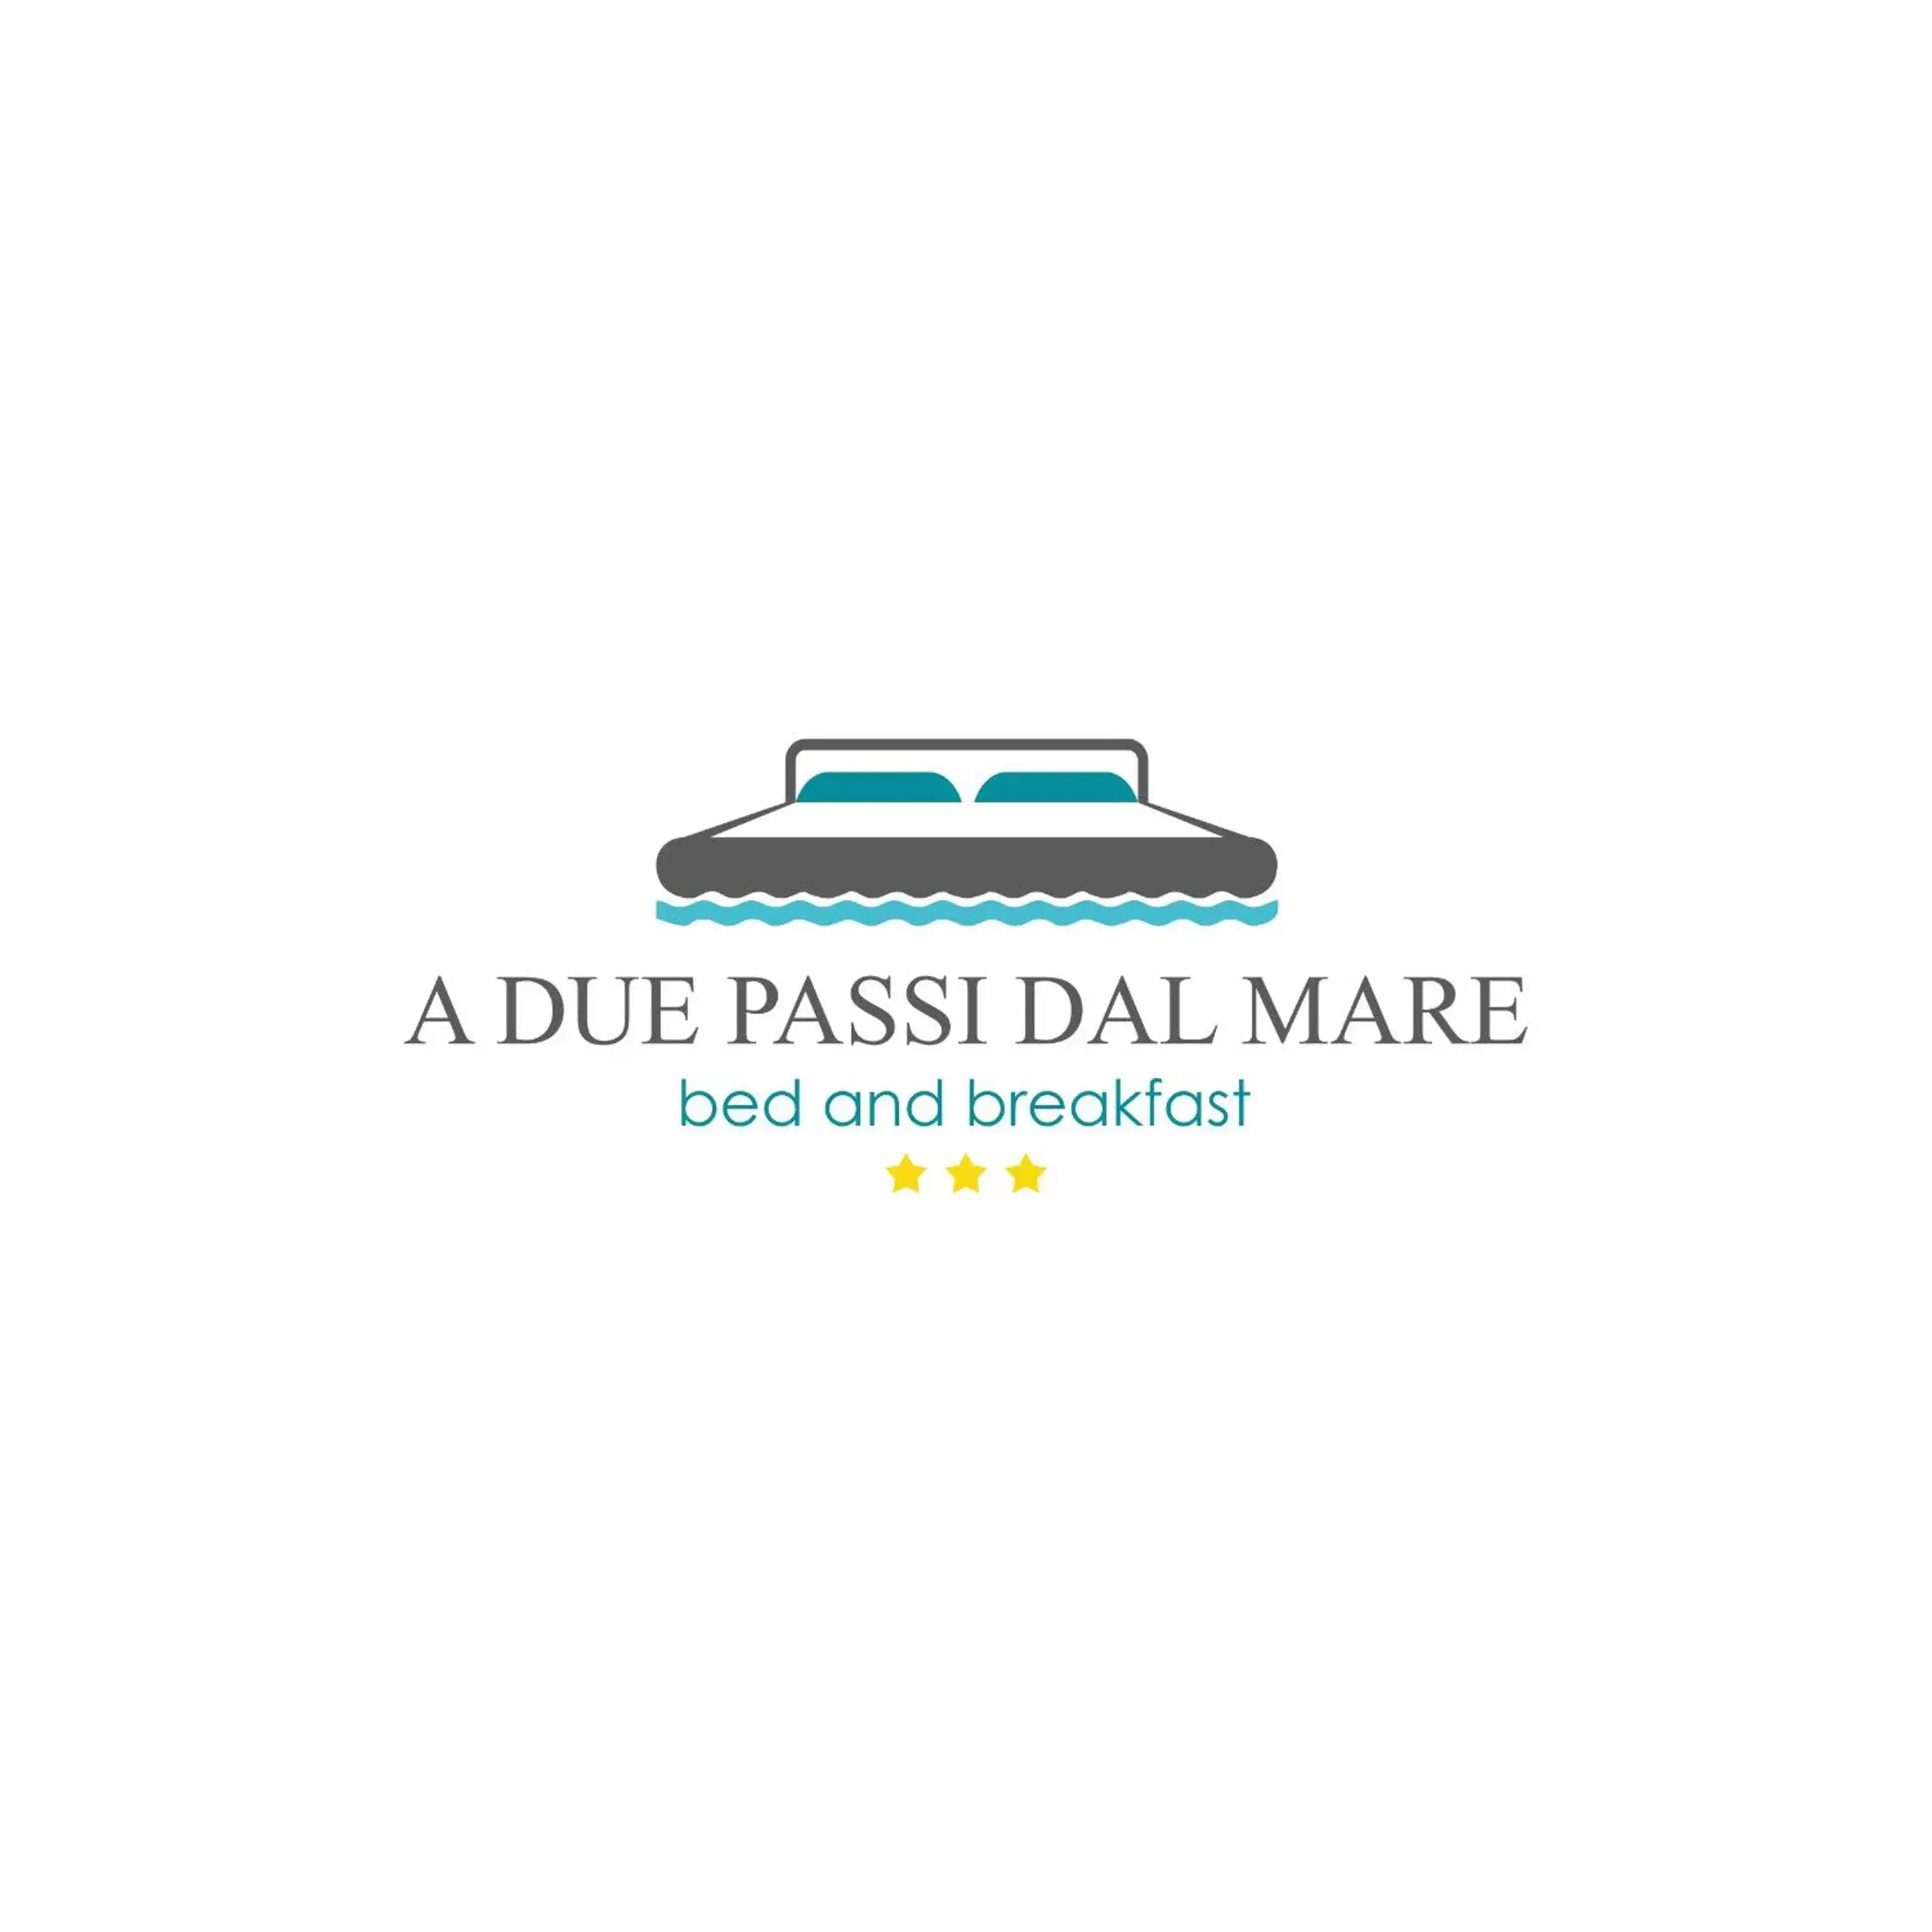 Property logo or sign, Property Logo/Sign in B&B a due passi dal mare